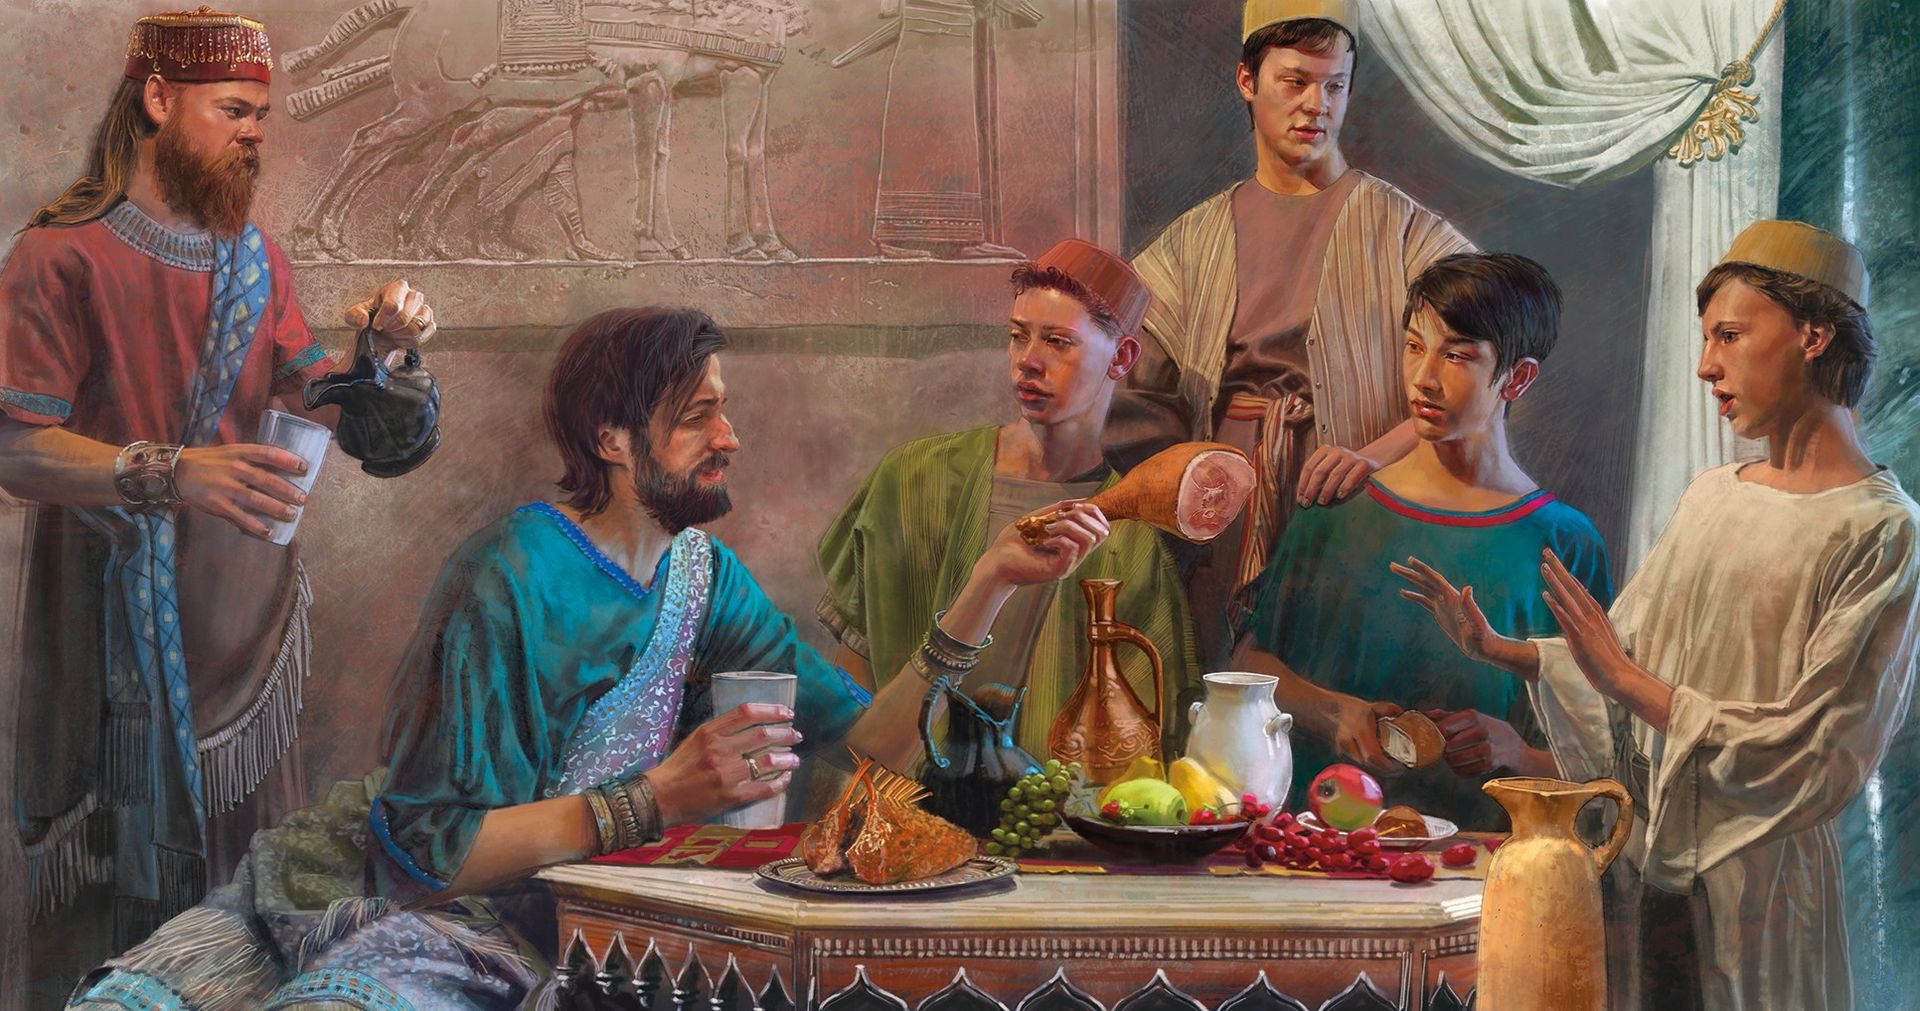 Illustration of the prophet Daniel with advisers during a meal.